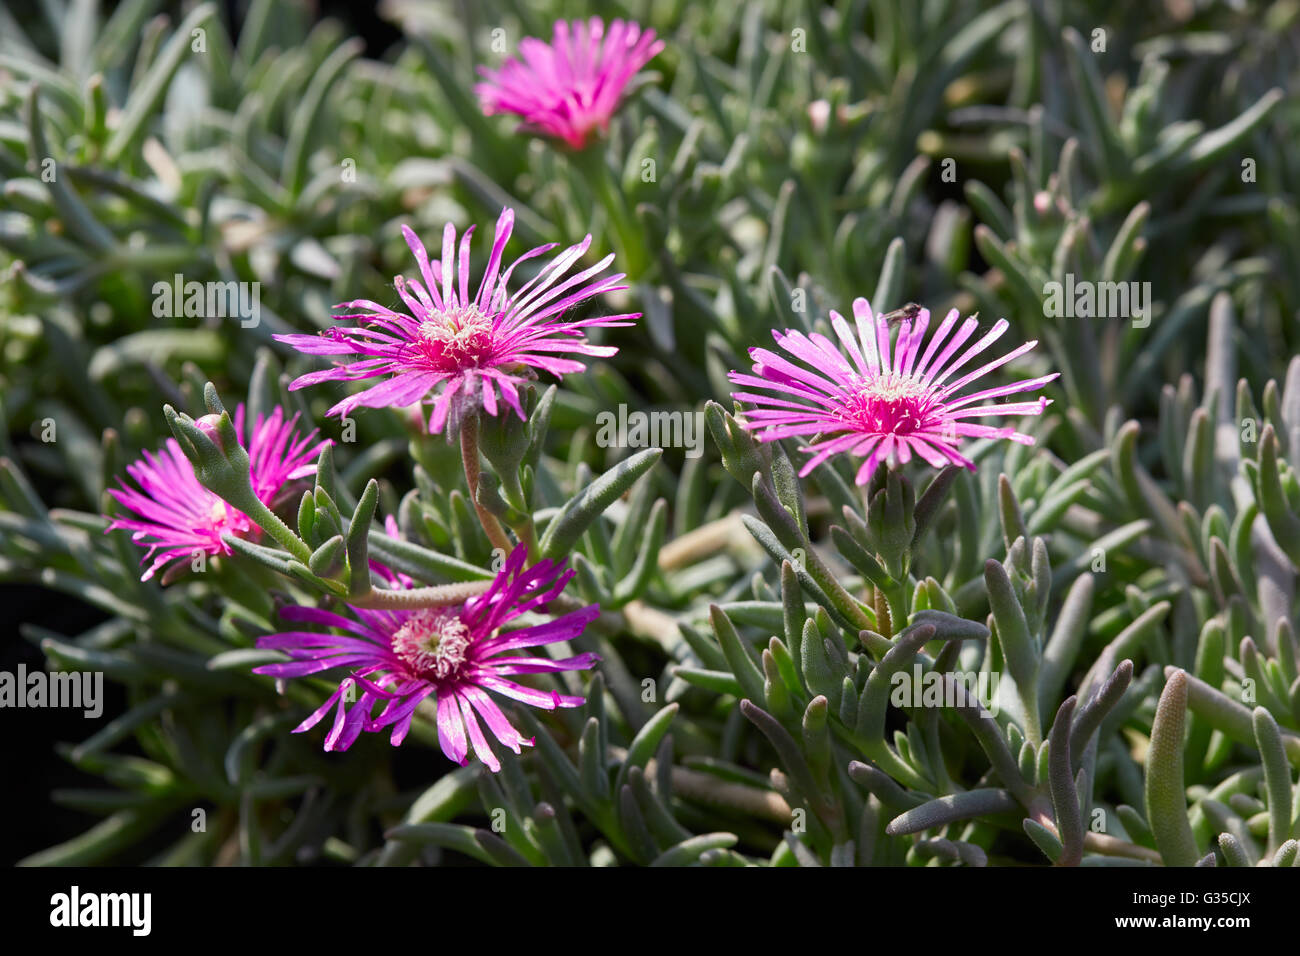 Delosperma cooperi, trailing iceplant pink flowers and leaves Stock Photo